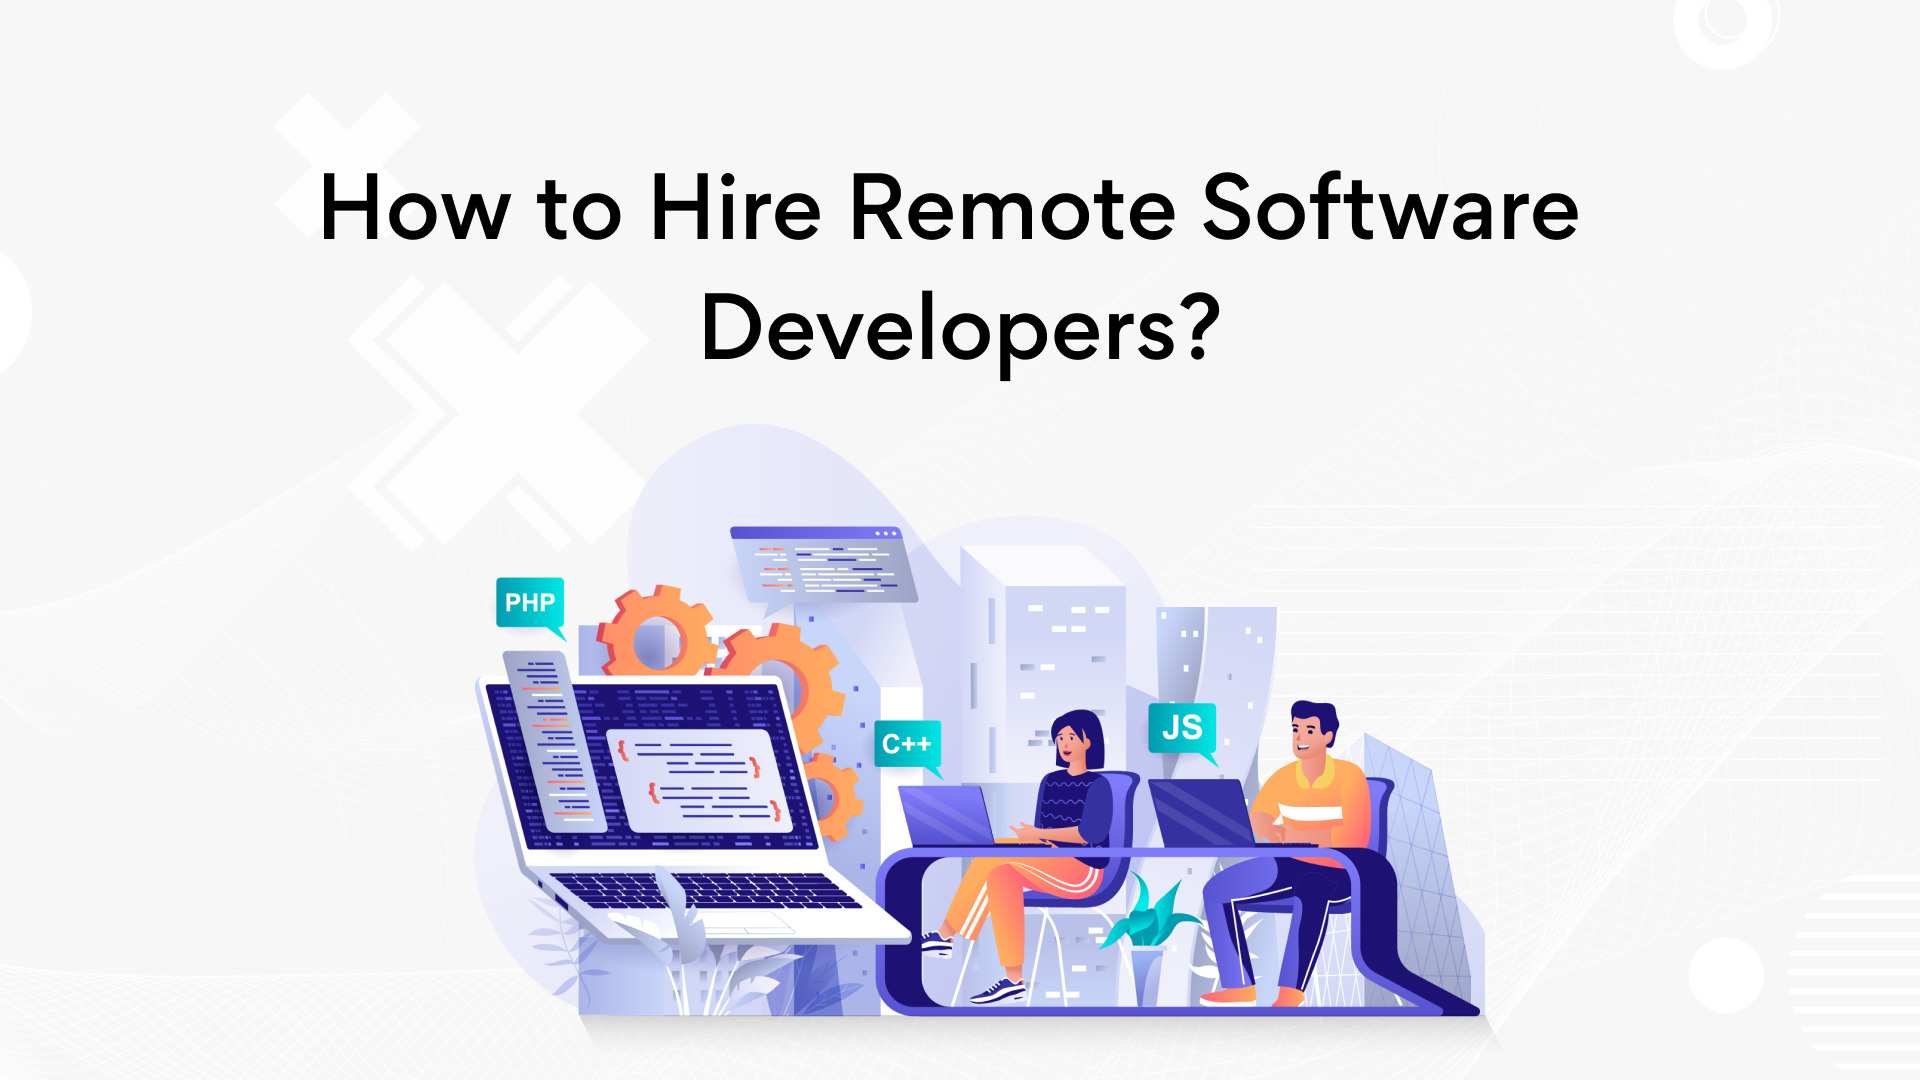 Hire remote software developers